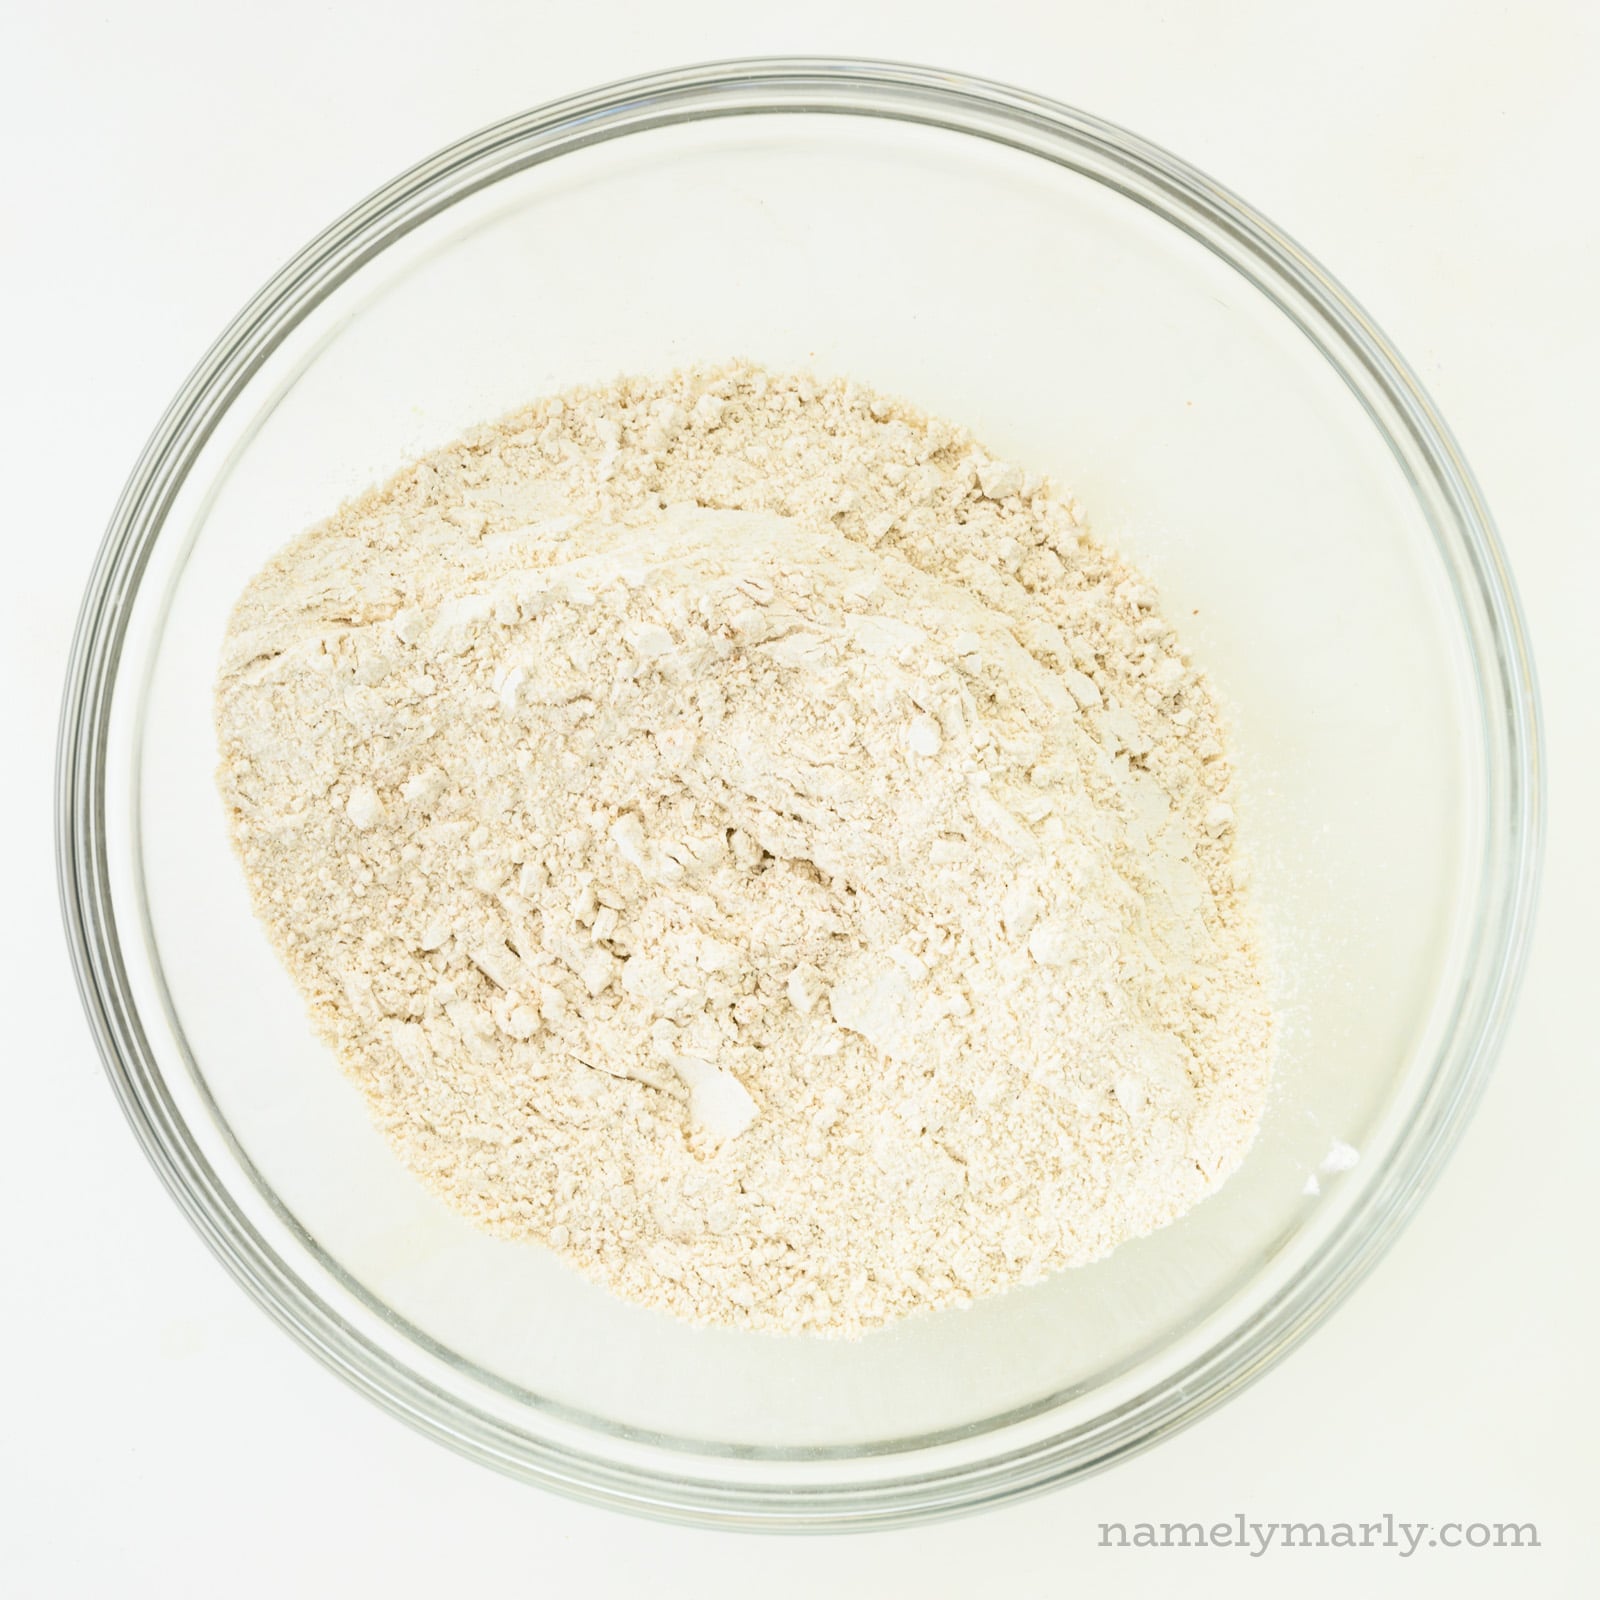 A flour mixture is in a glass bowl.